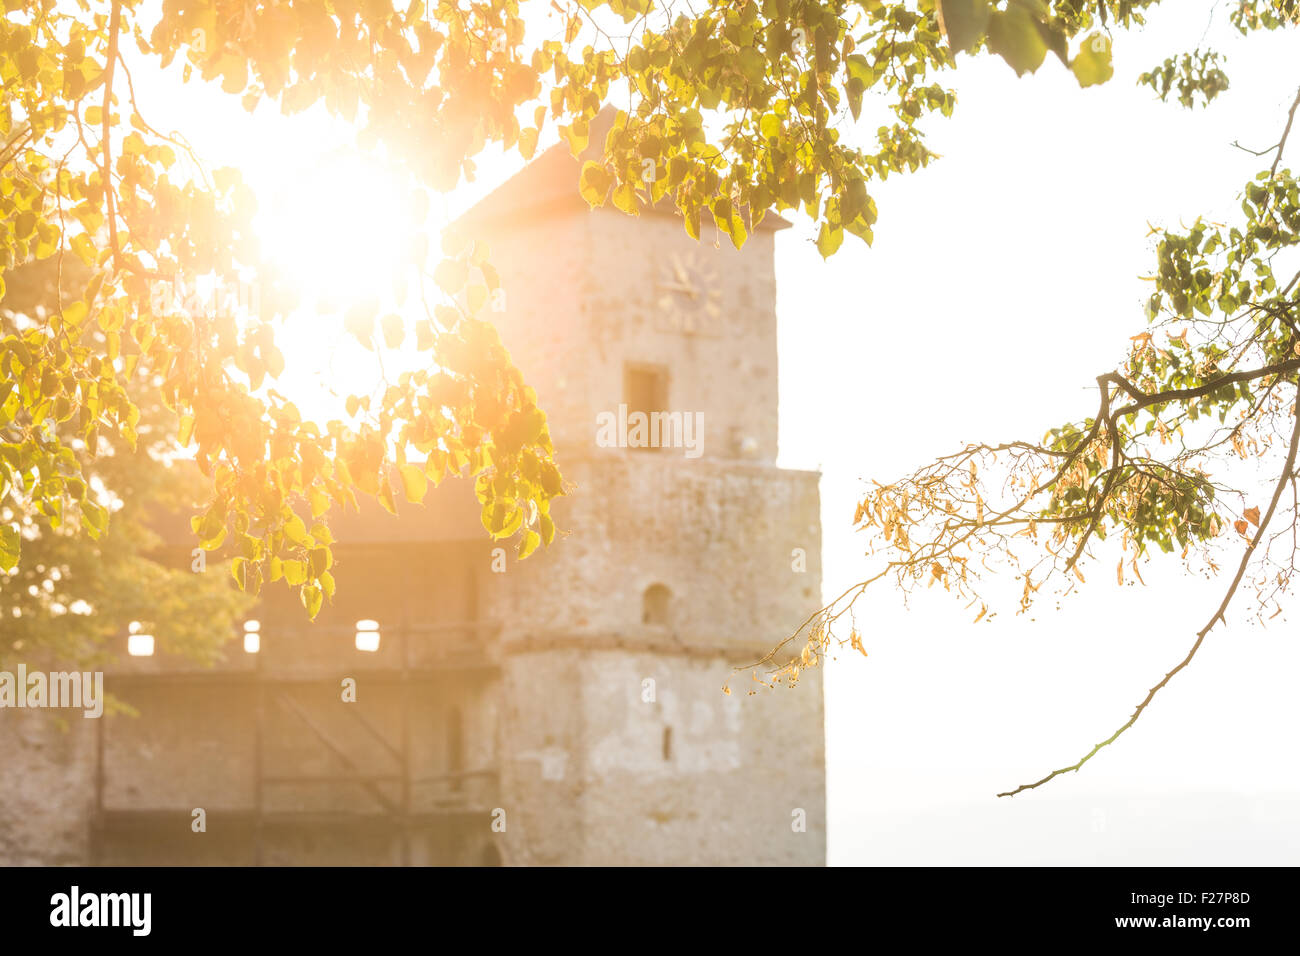 A tower of Trencin castle with a clock at sunset behind branches Stock Photo